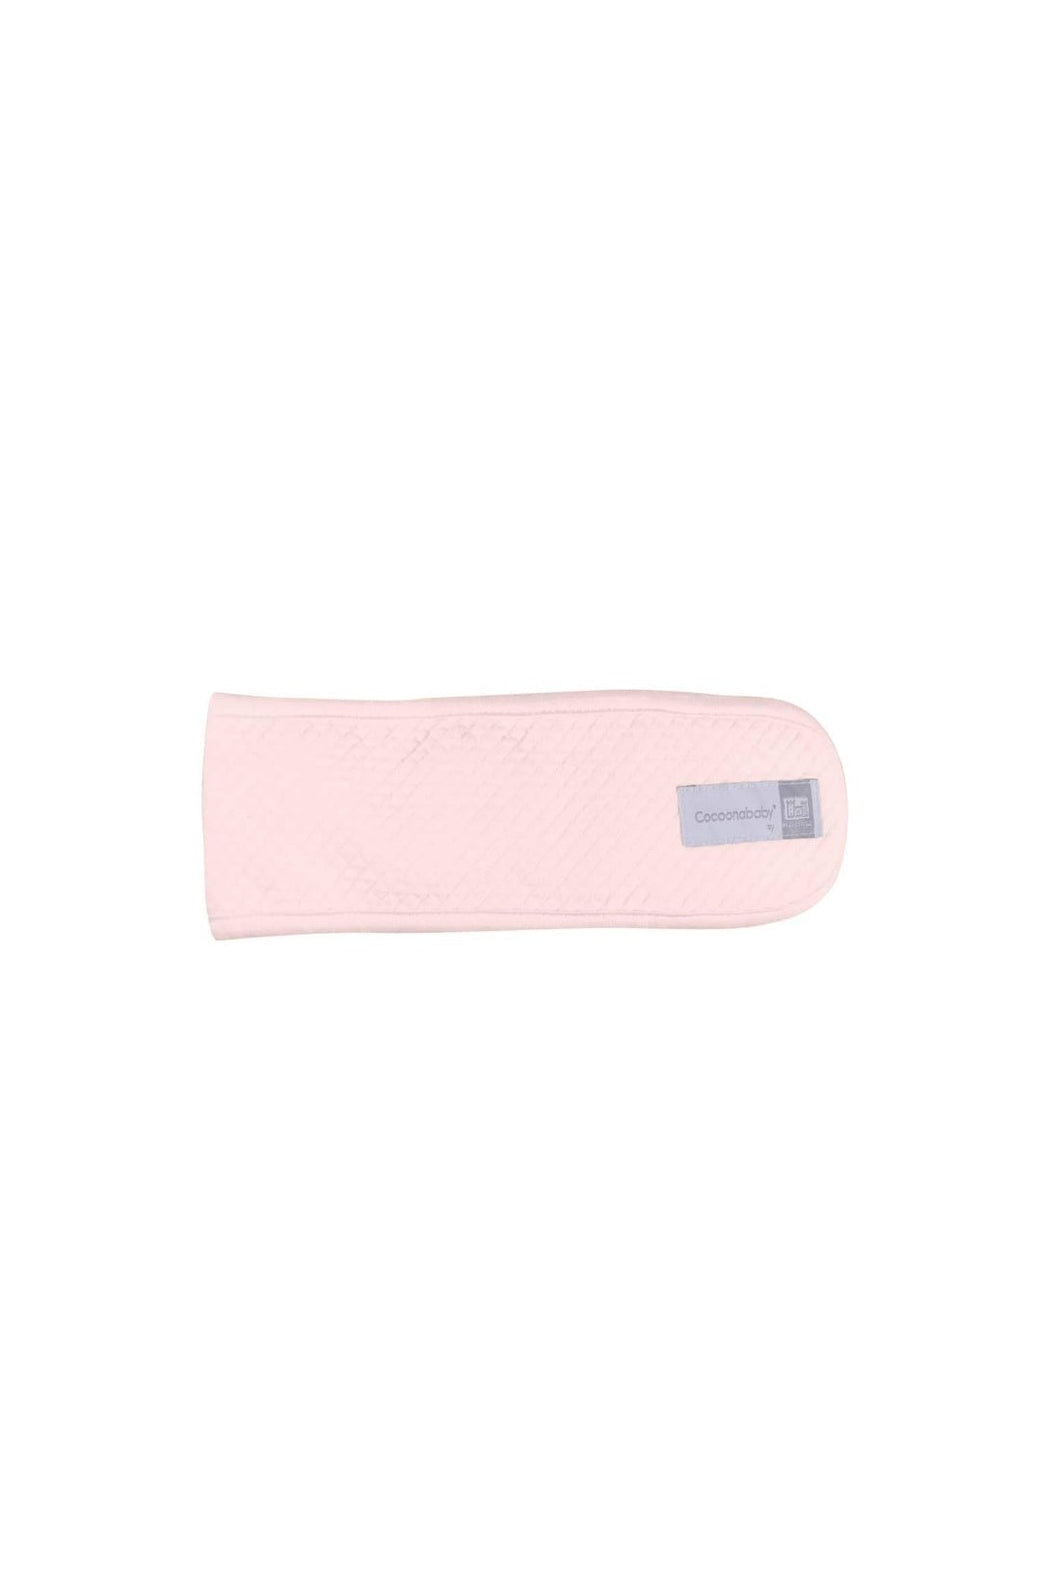 Red Castle Cocoonababy Spare Tummy Band Pink